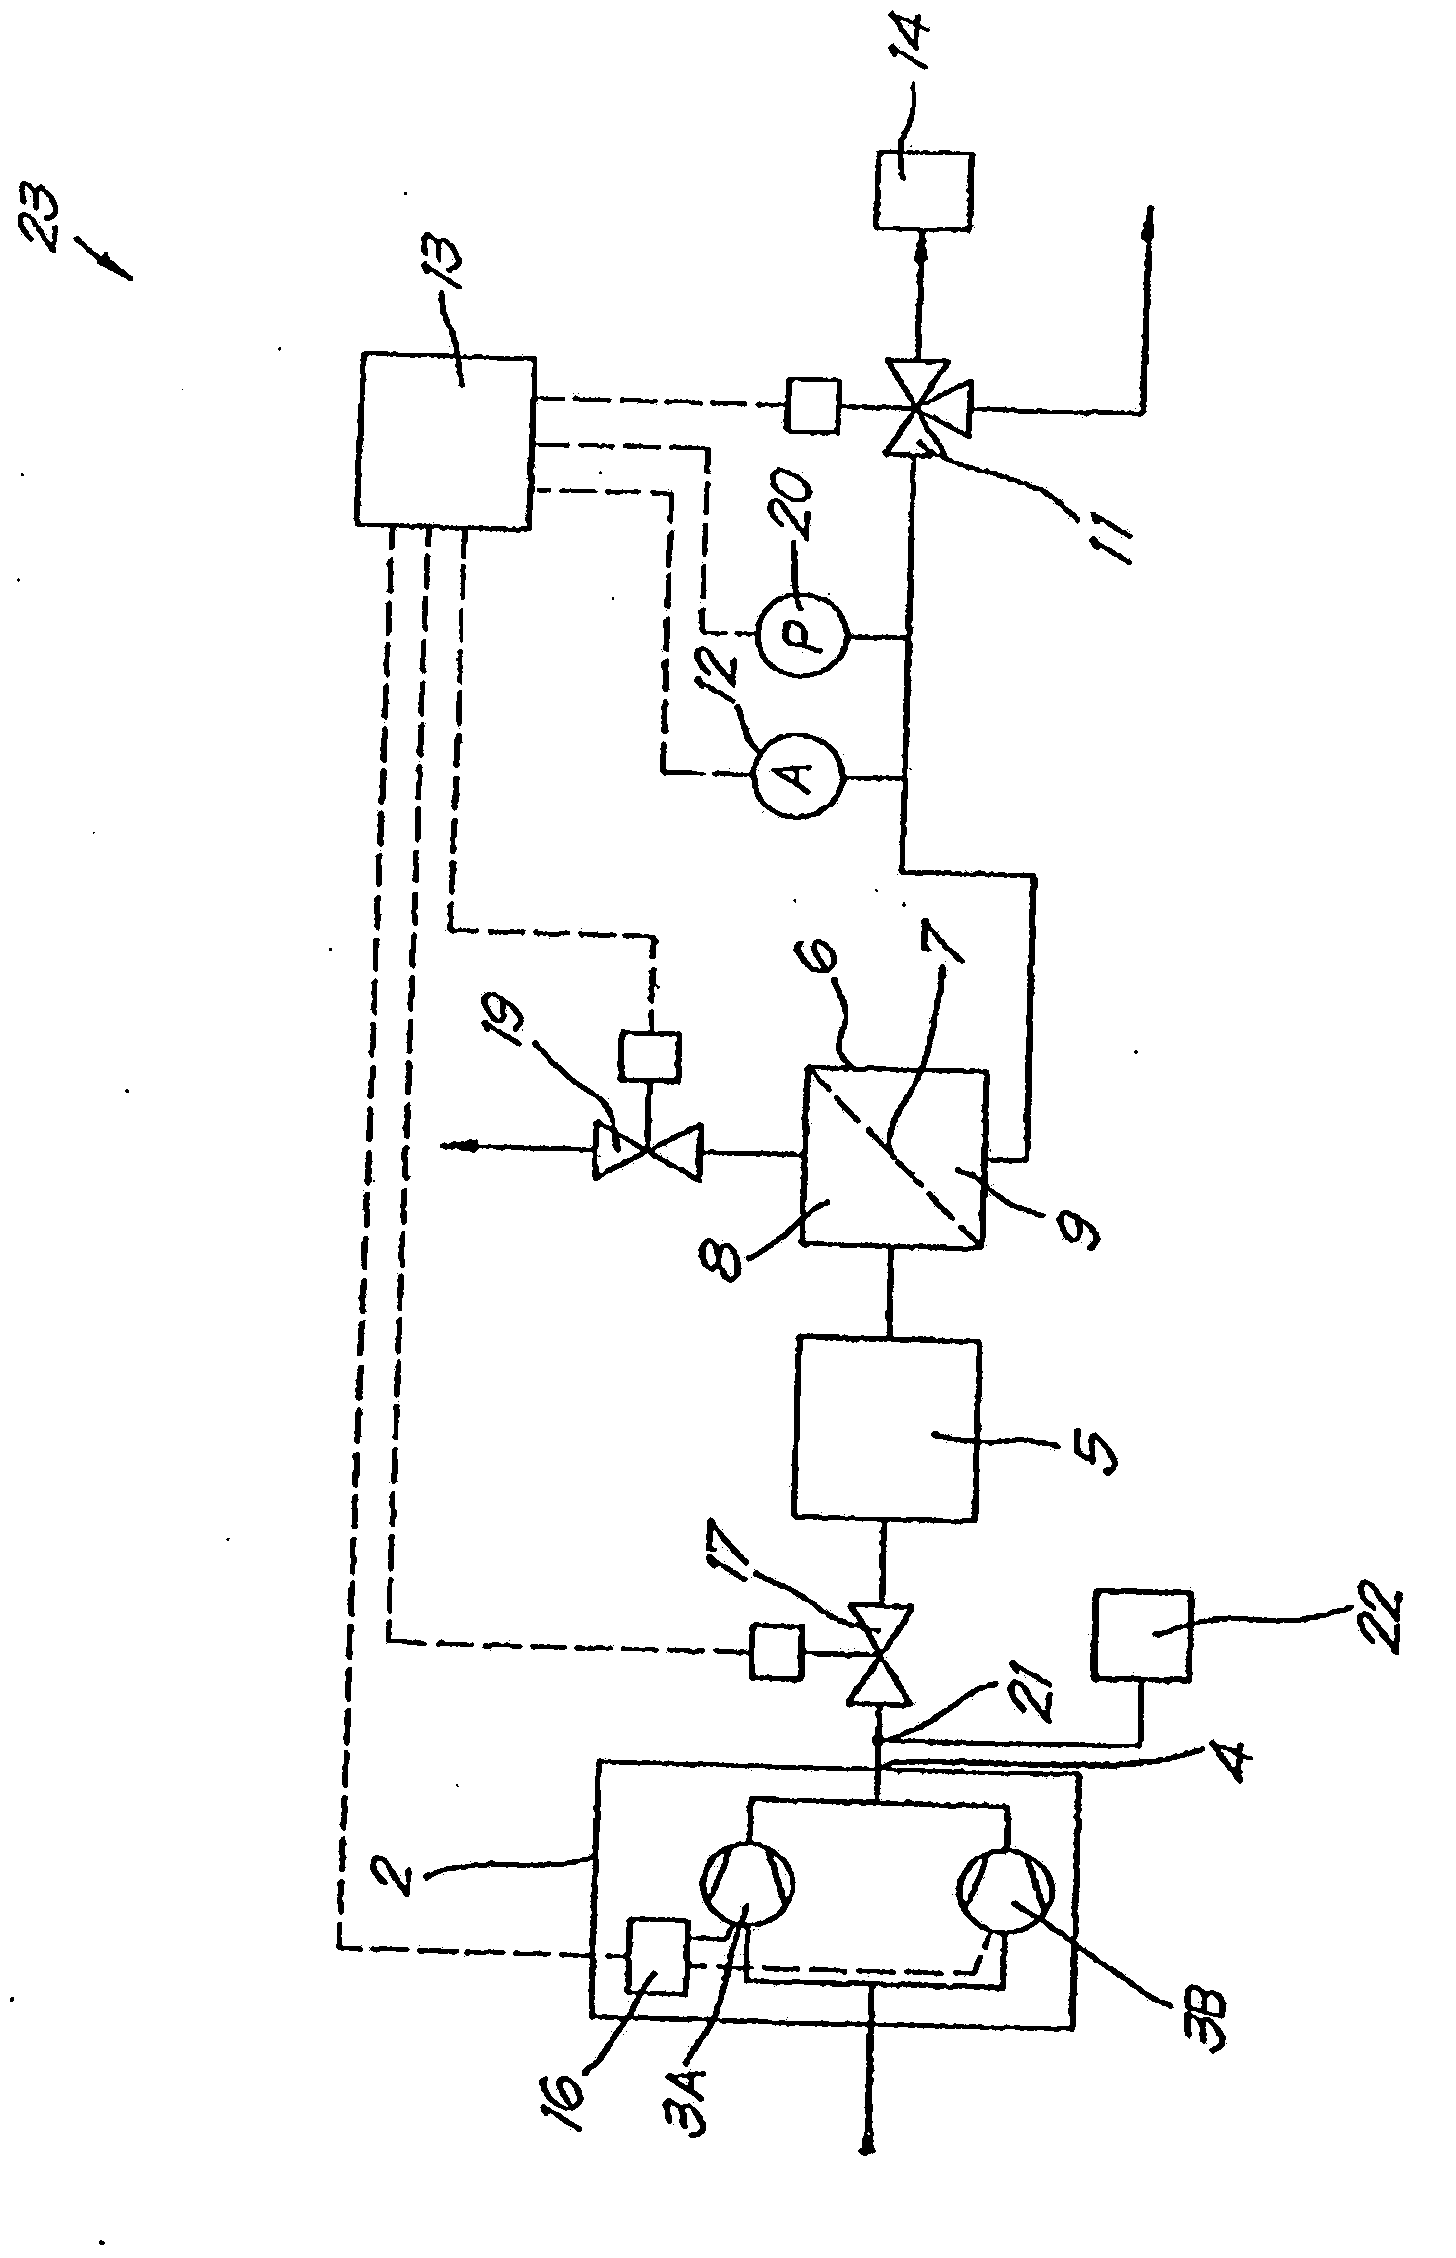 Method and device for separating gases